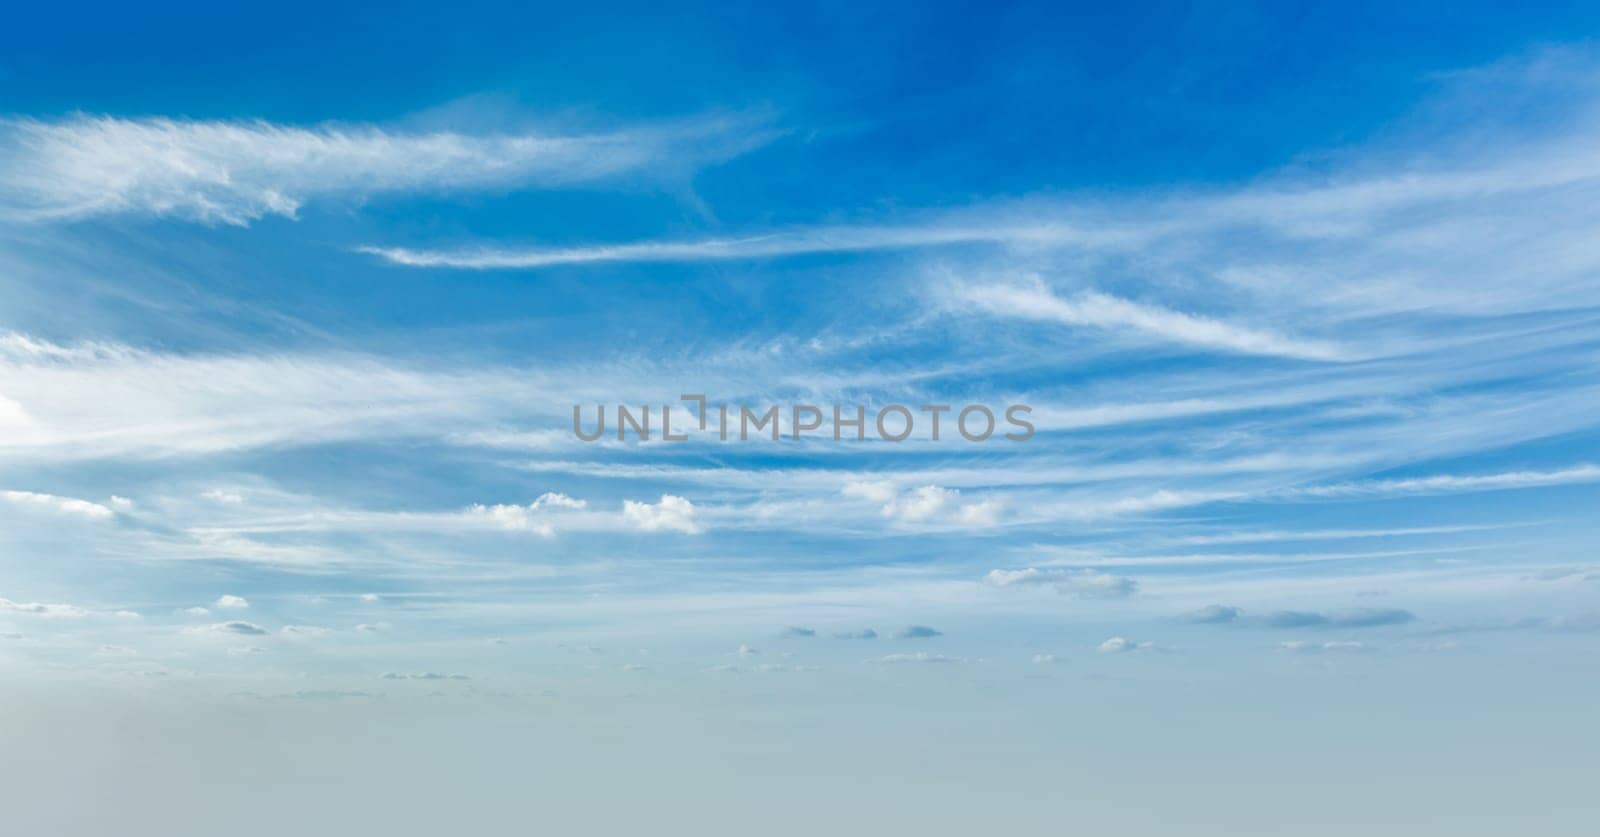 Blue sky with clouds by dimol